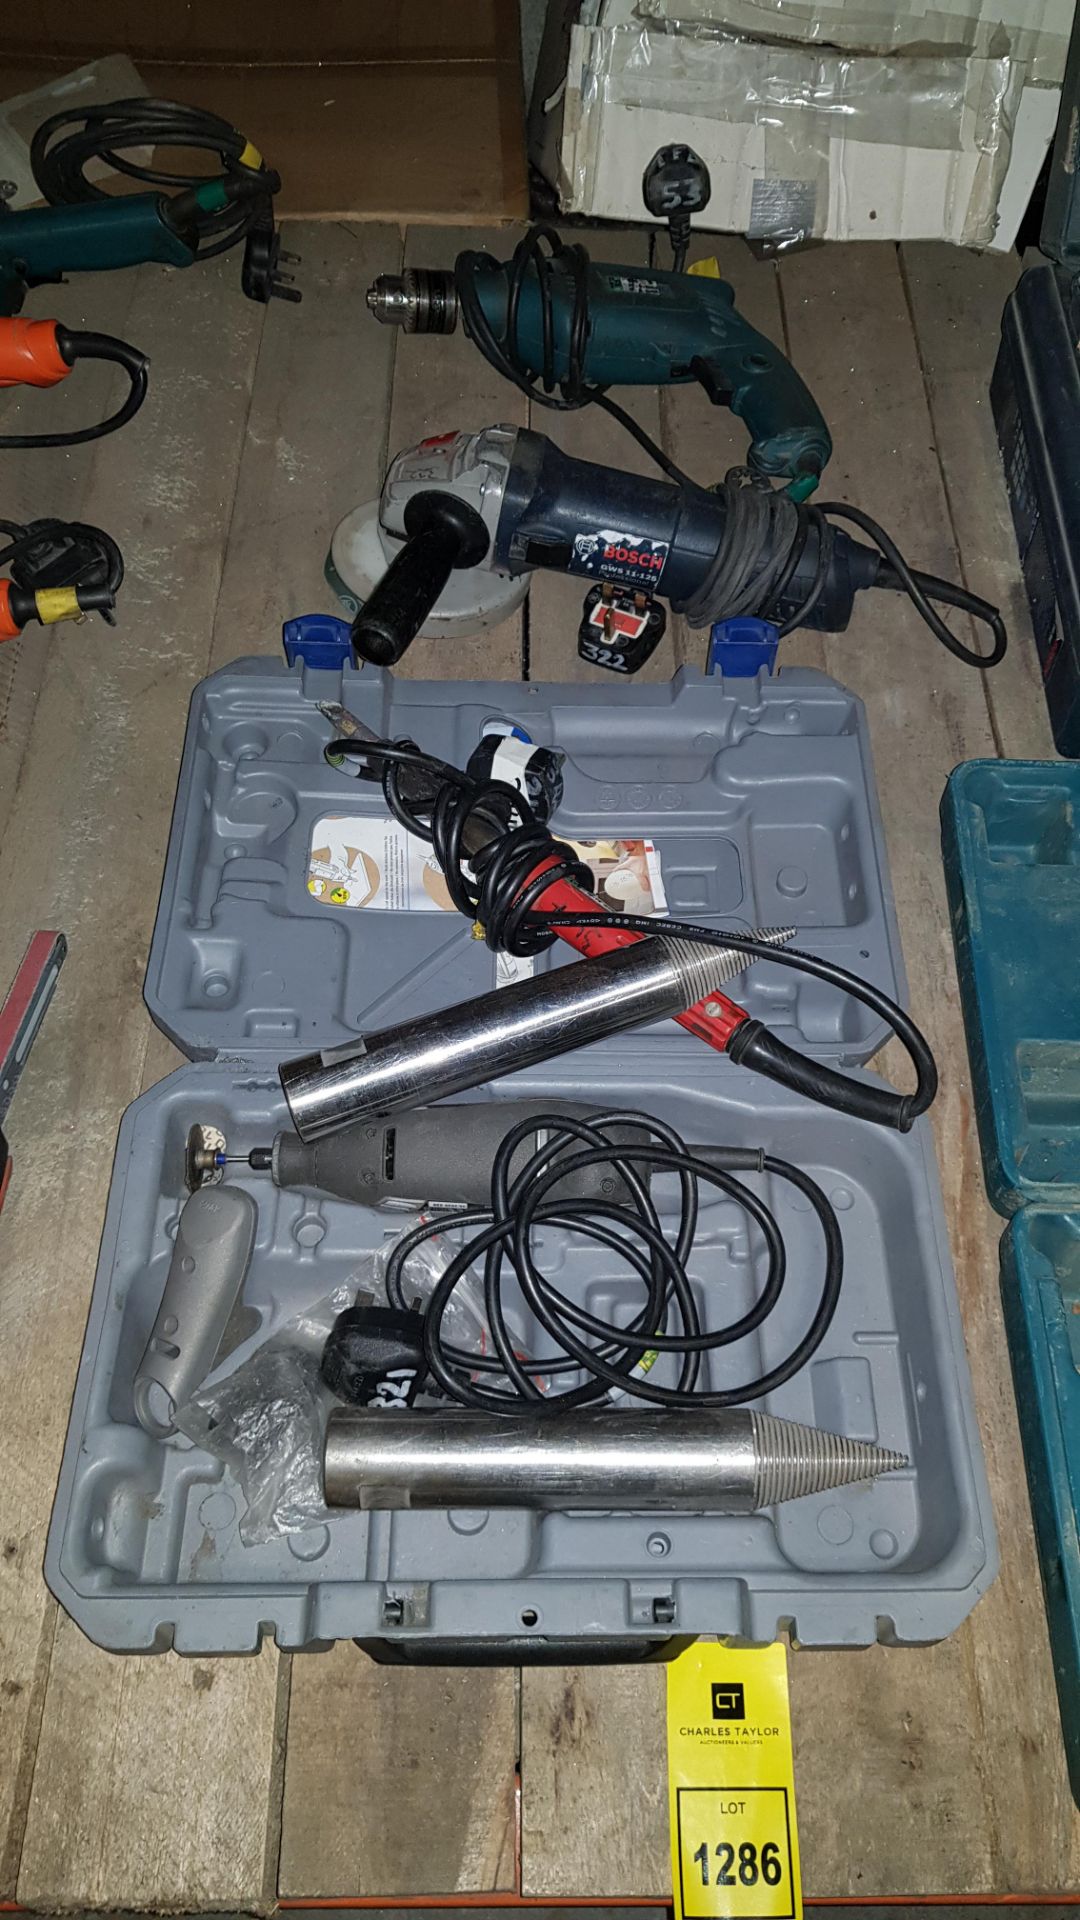 4 PIECE MIXED TOOL LOT TO INCLUDE 1 X BOSCH GRINDER 1 X MAKITA DRILL, 1 X SOLDERING IRON AND 1 X